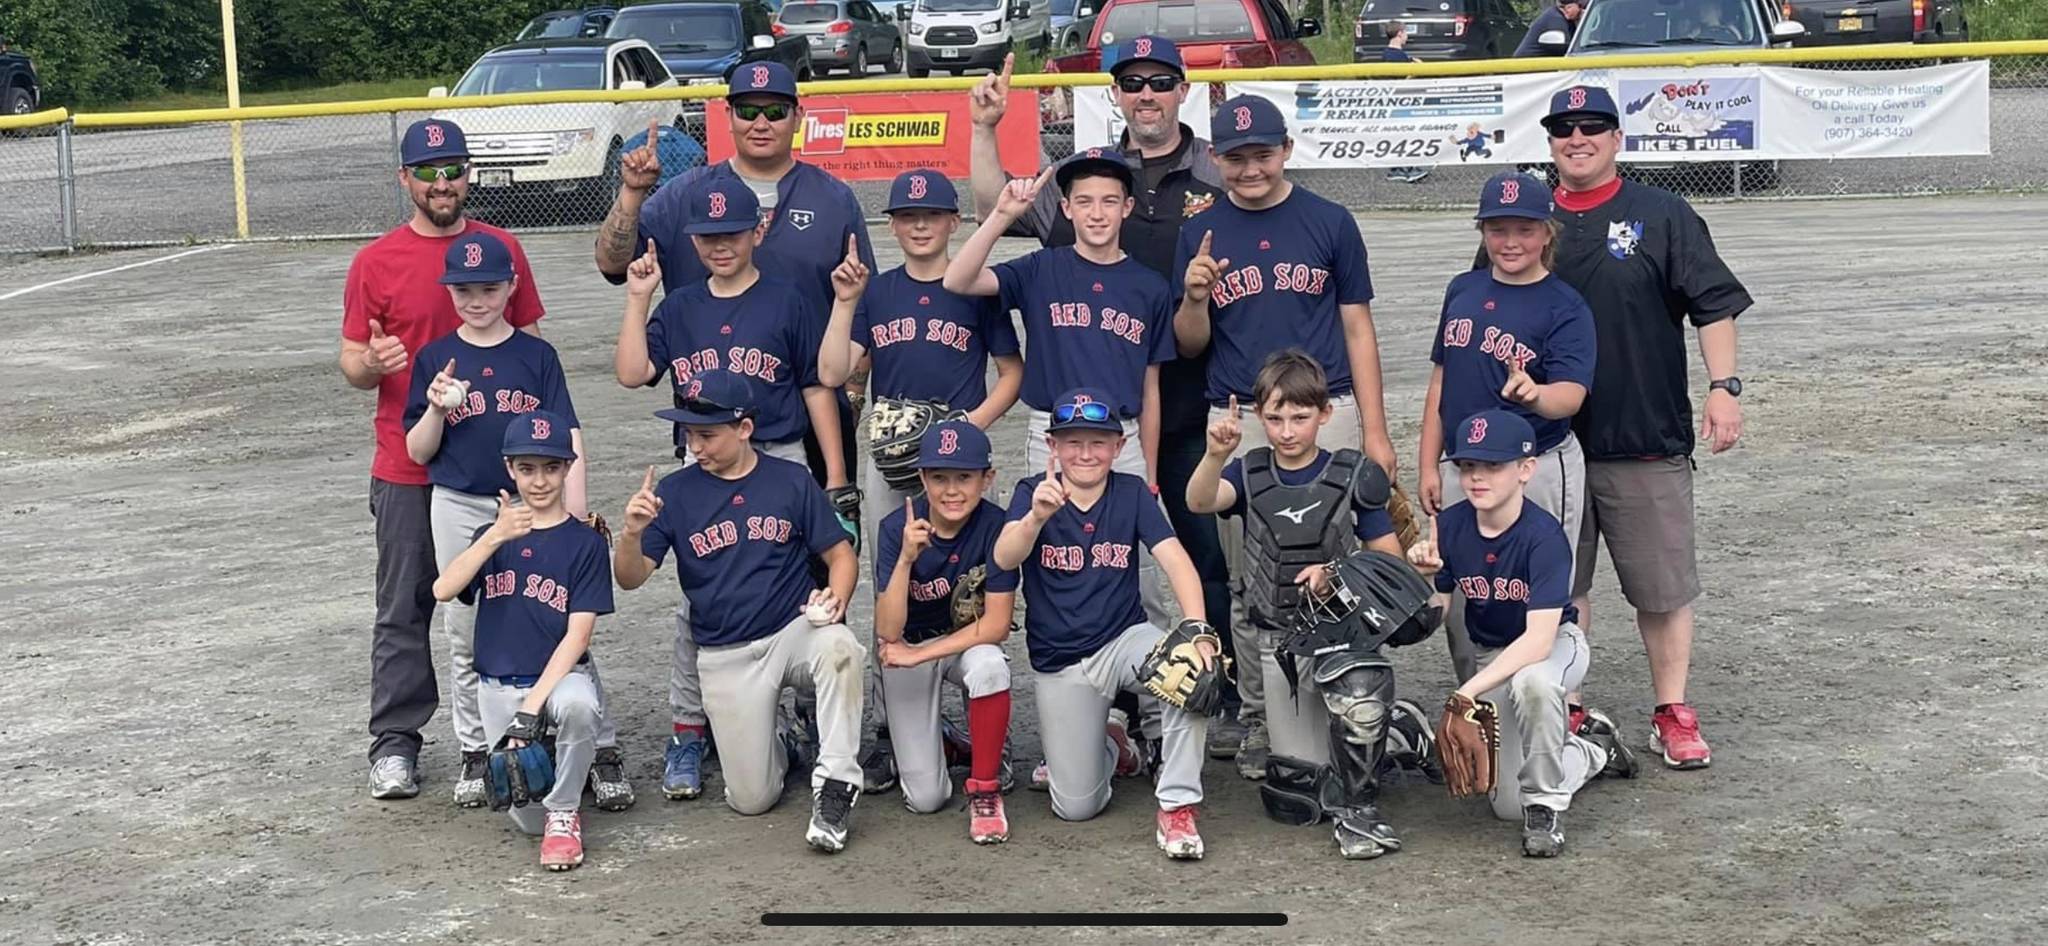 Courtesy Photo
This photo shows the GCLL Majors championship-winning Begenyi Engineering Red Sox. Back row: Coaches John Randolph, Nick Nelson, Jake Carte and Jamie Kissner. Middle Row: Porter Goudie, Silas Dominguez-Keeler, Hunter Carte, Charlie Begenyi, Max Pillifant, Ivan Shockley. Front row: Carson Kautz, Nathaniel Ploof, Micah Nelson, Kamden Kissner, Jamie Randolph and Liam Kiessling.